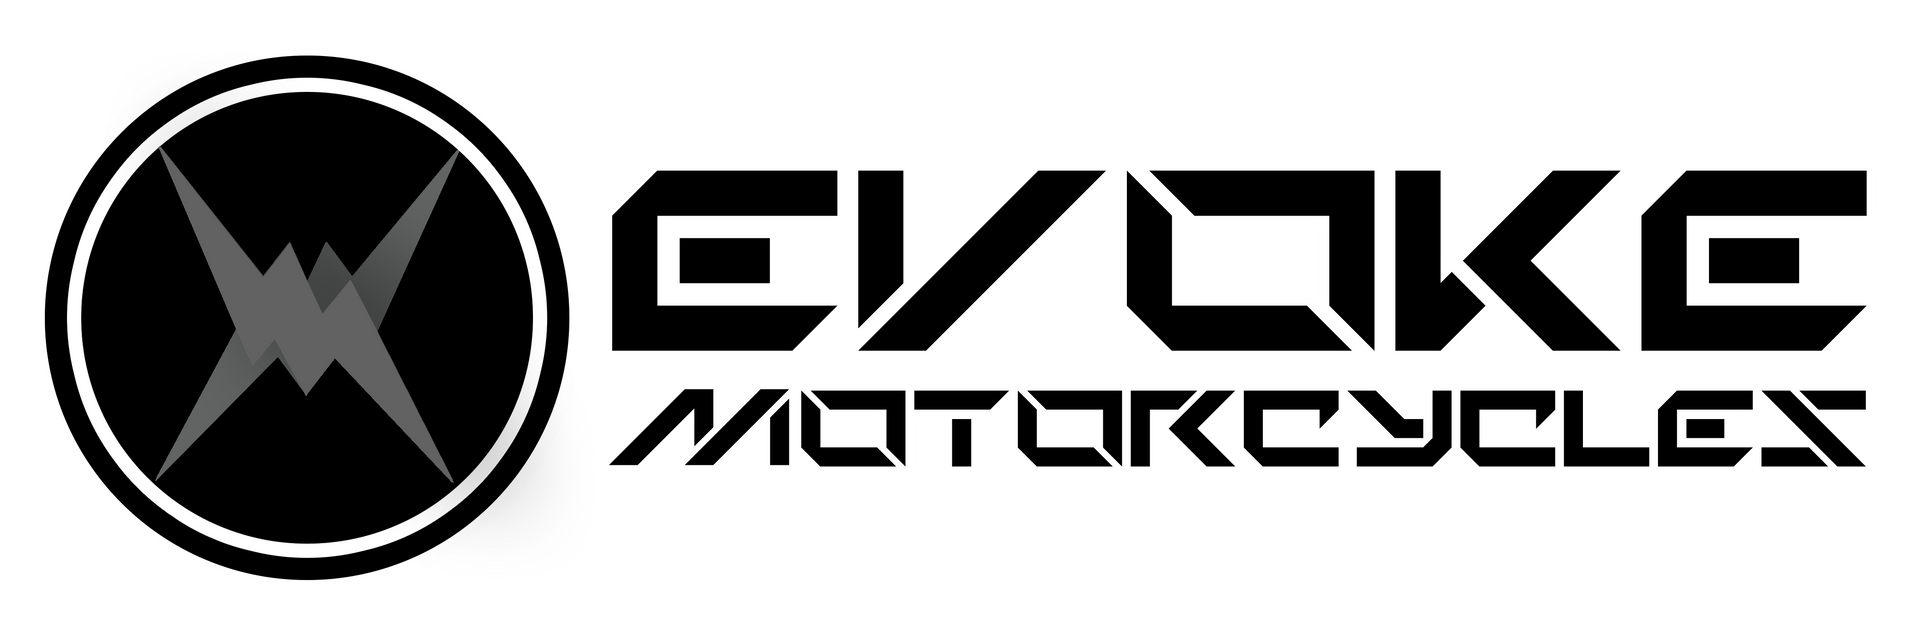 A black and white logo for evolve motorcycles.